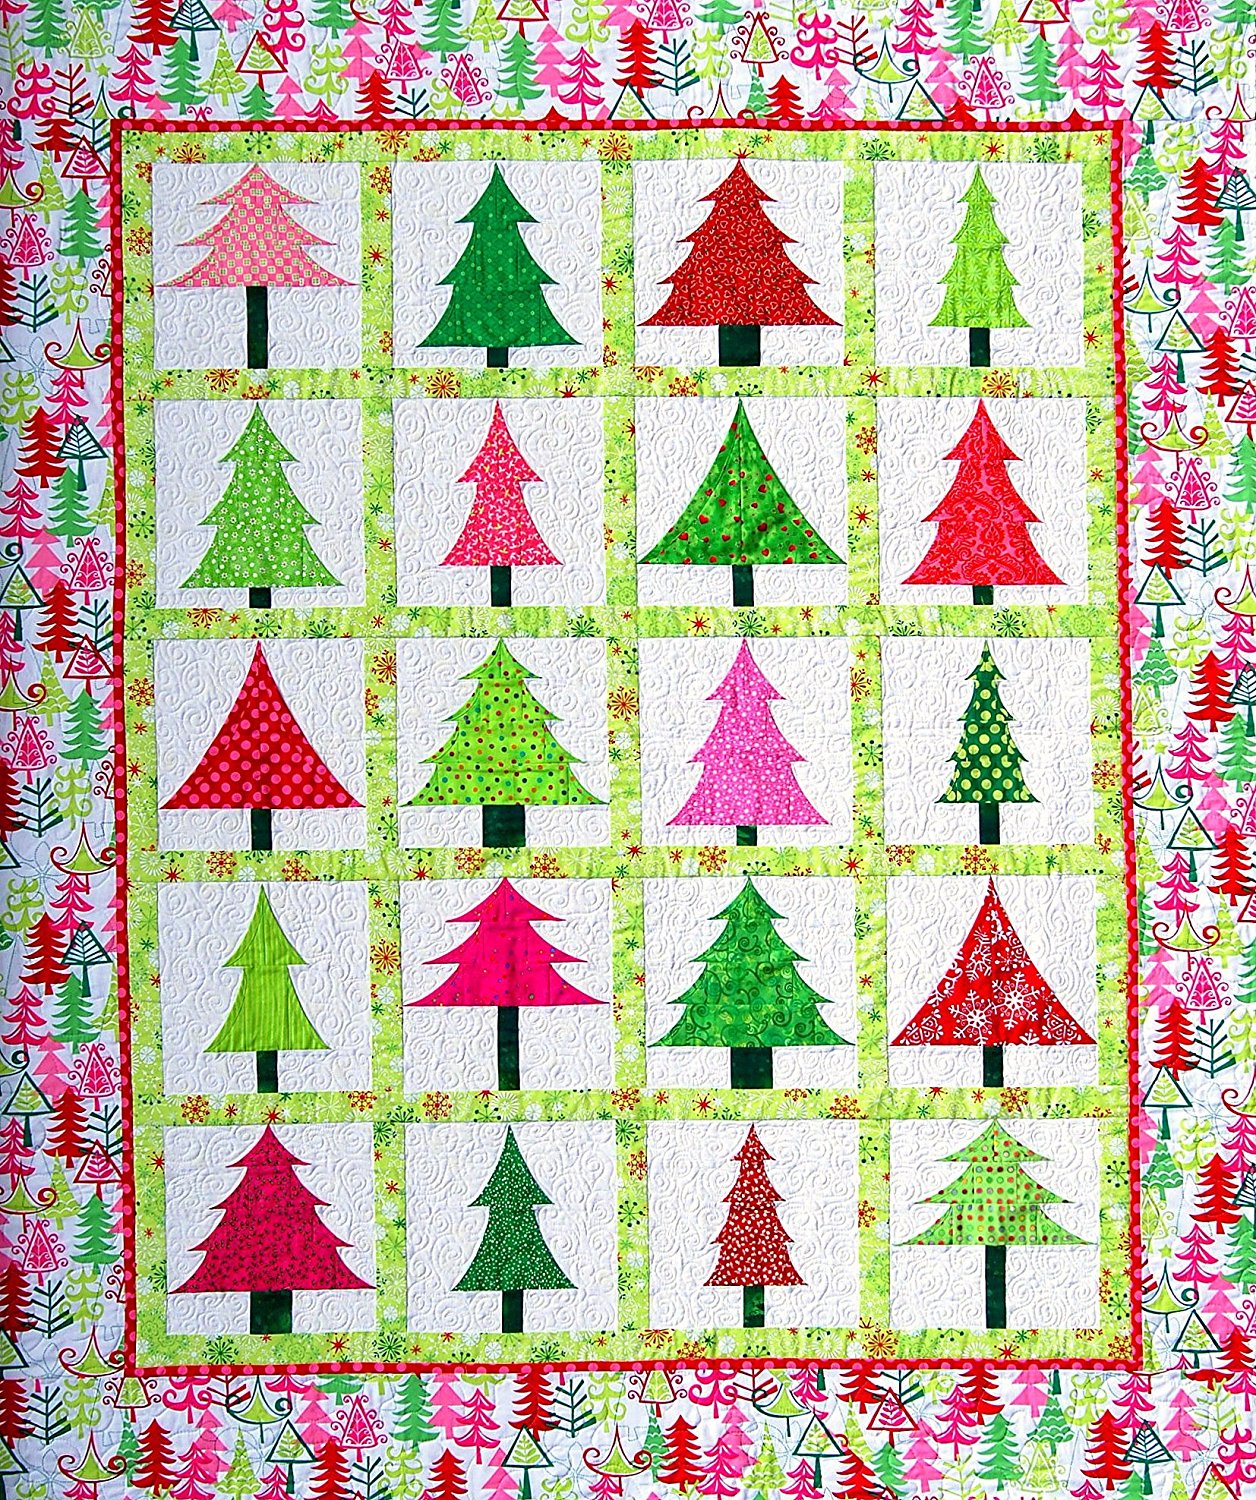 10+ Christmas Quilt Patterns and Books: These adorable Christmas sewing patterns and books are perfect to get you in the holiday spirit! Start your Christmas sewing now. Click through to see the entire list of patterns and books. www.sewwhatalicia.com